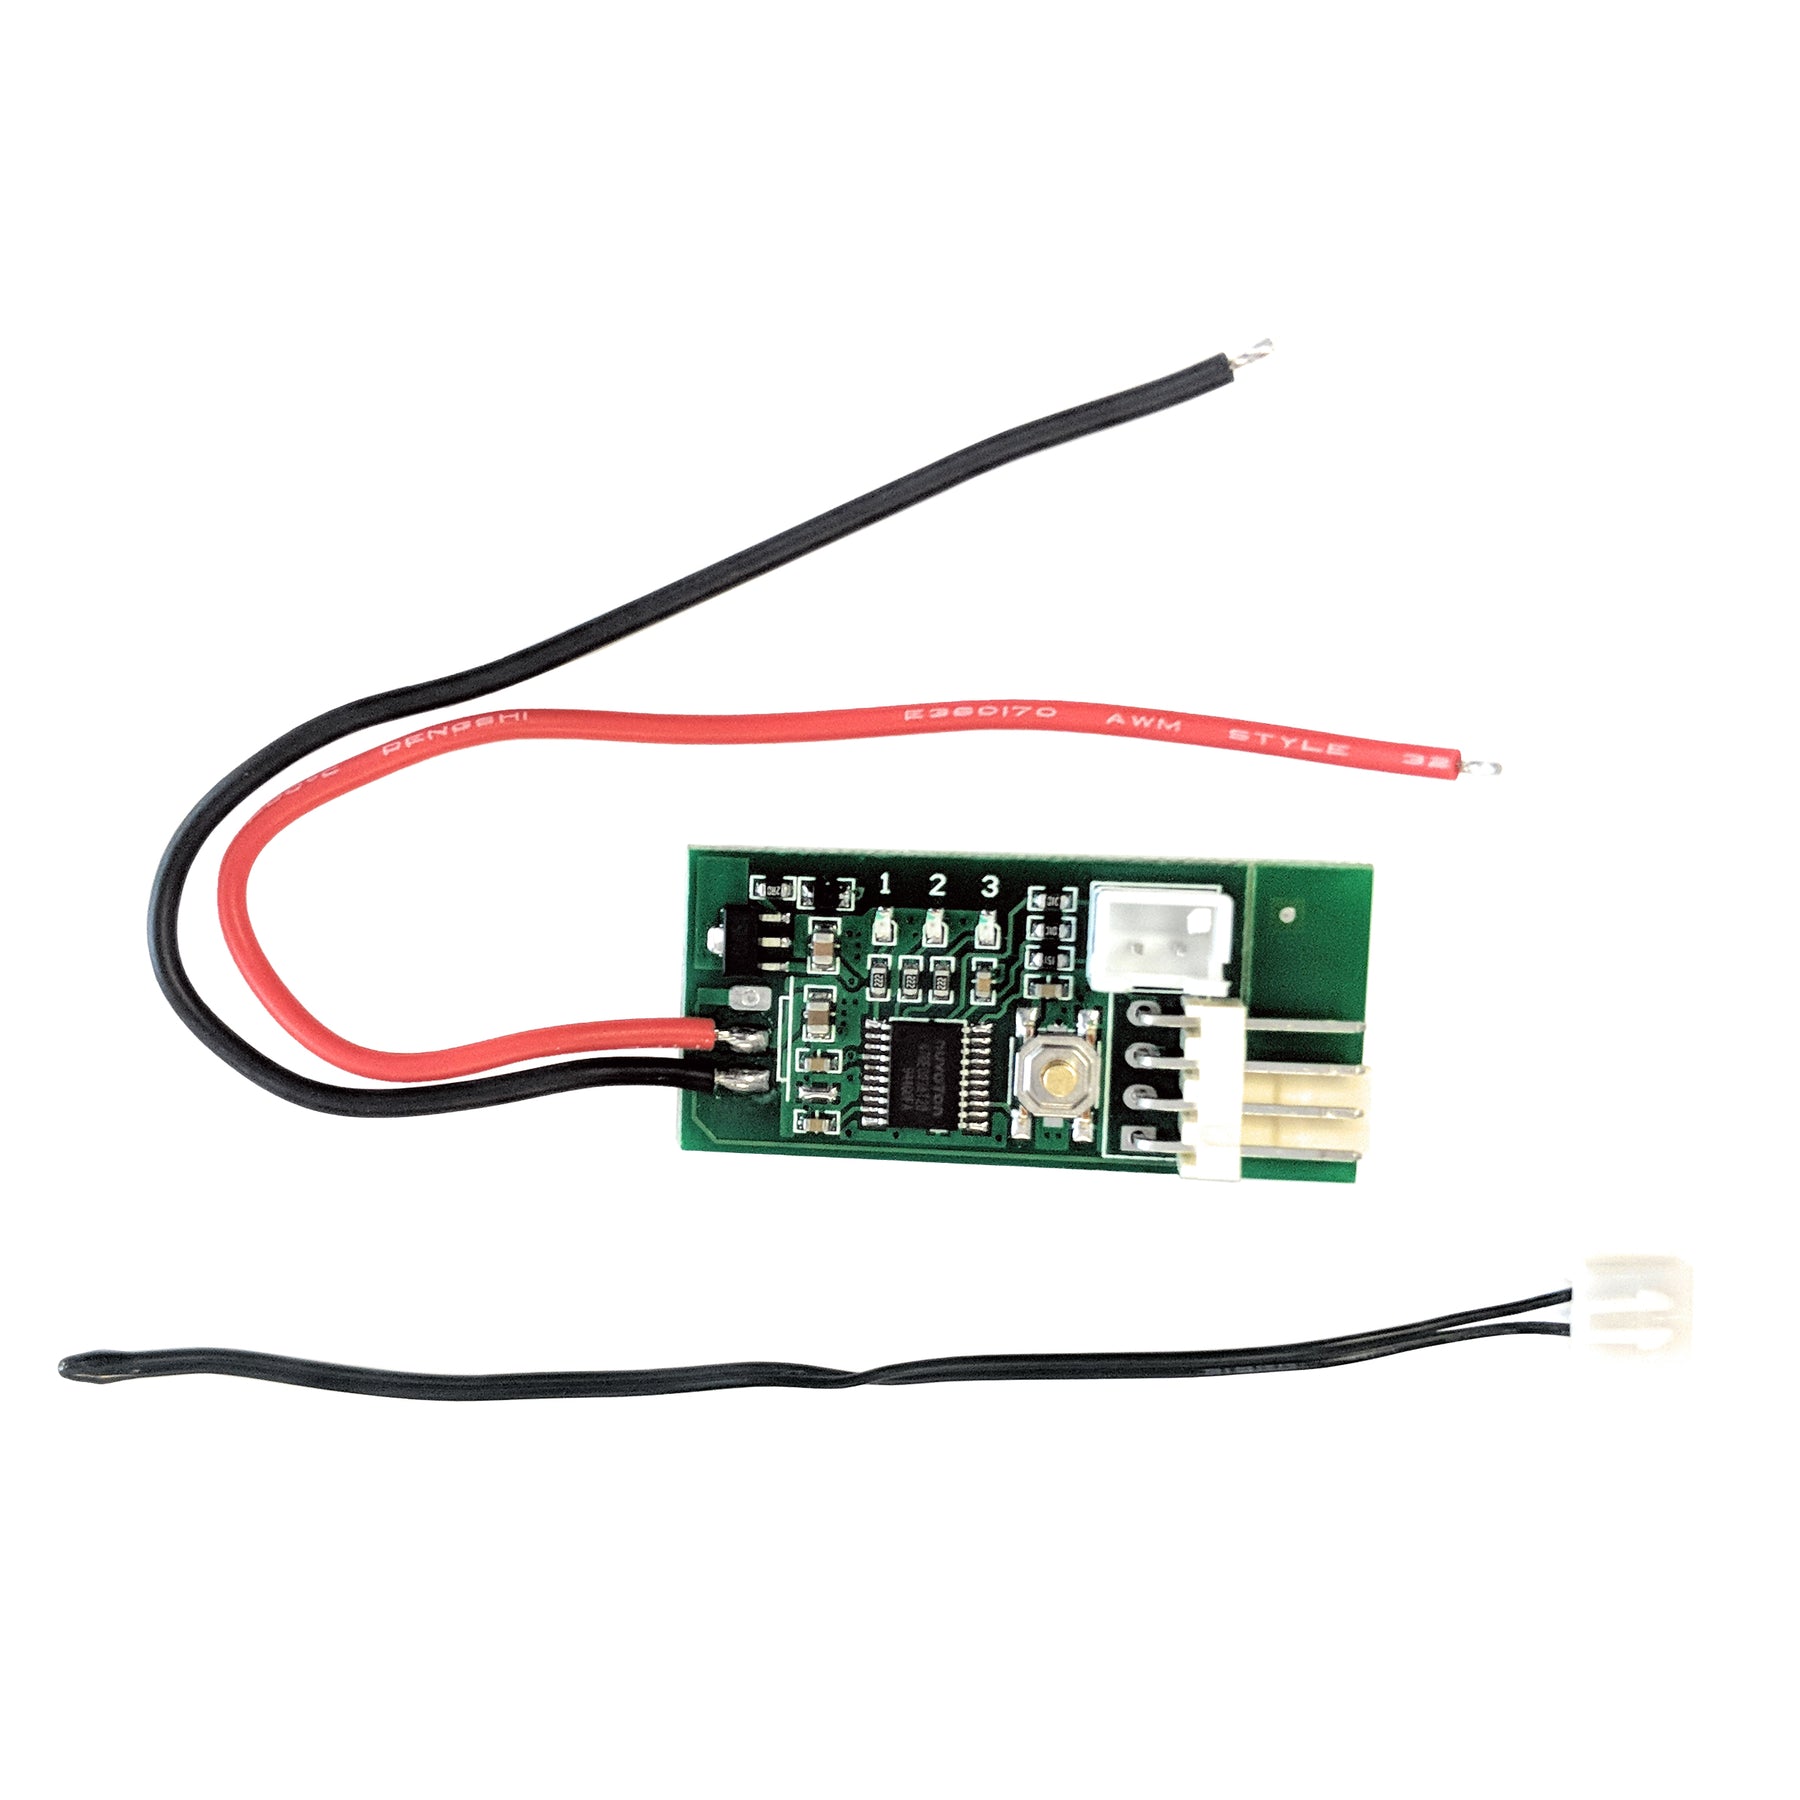 Buy Coolerguys 12v PWM Fan Thermostat Controller Online